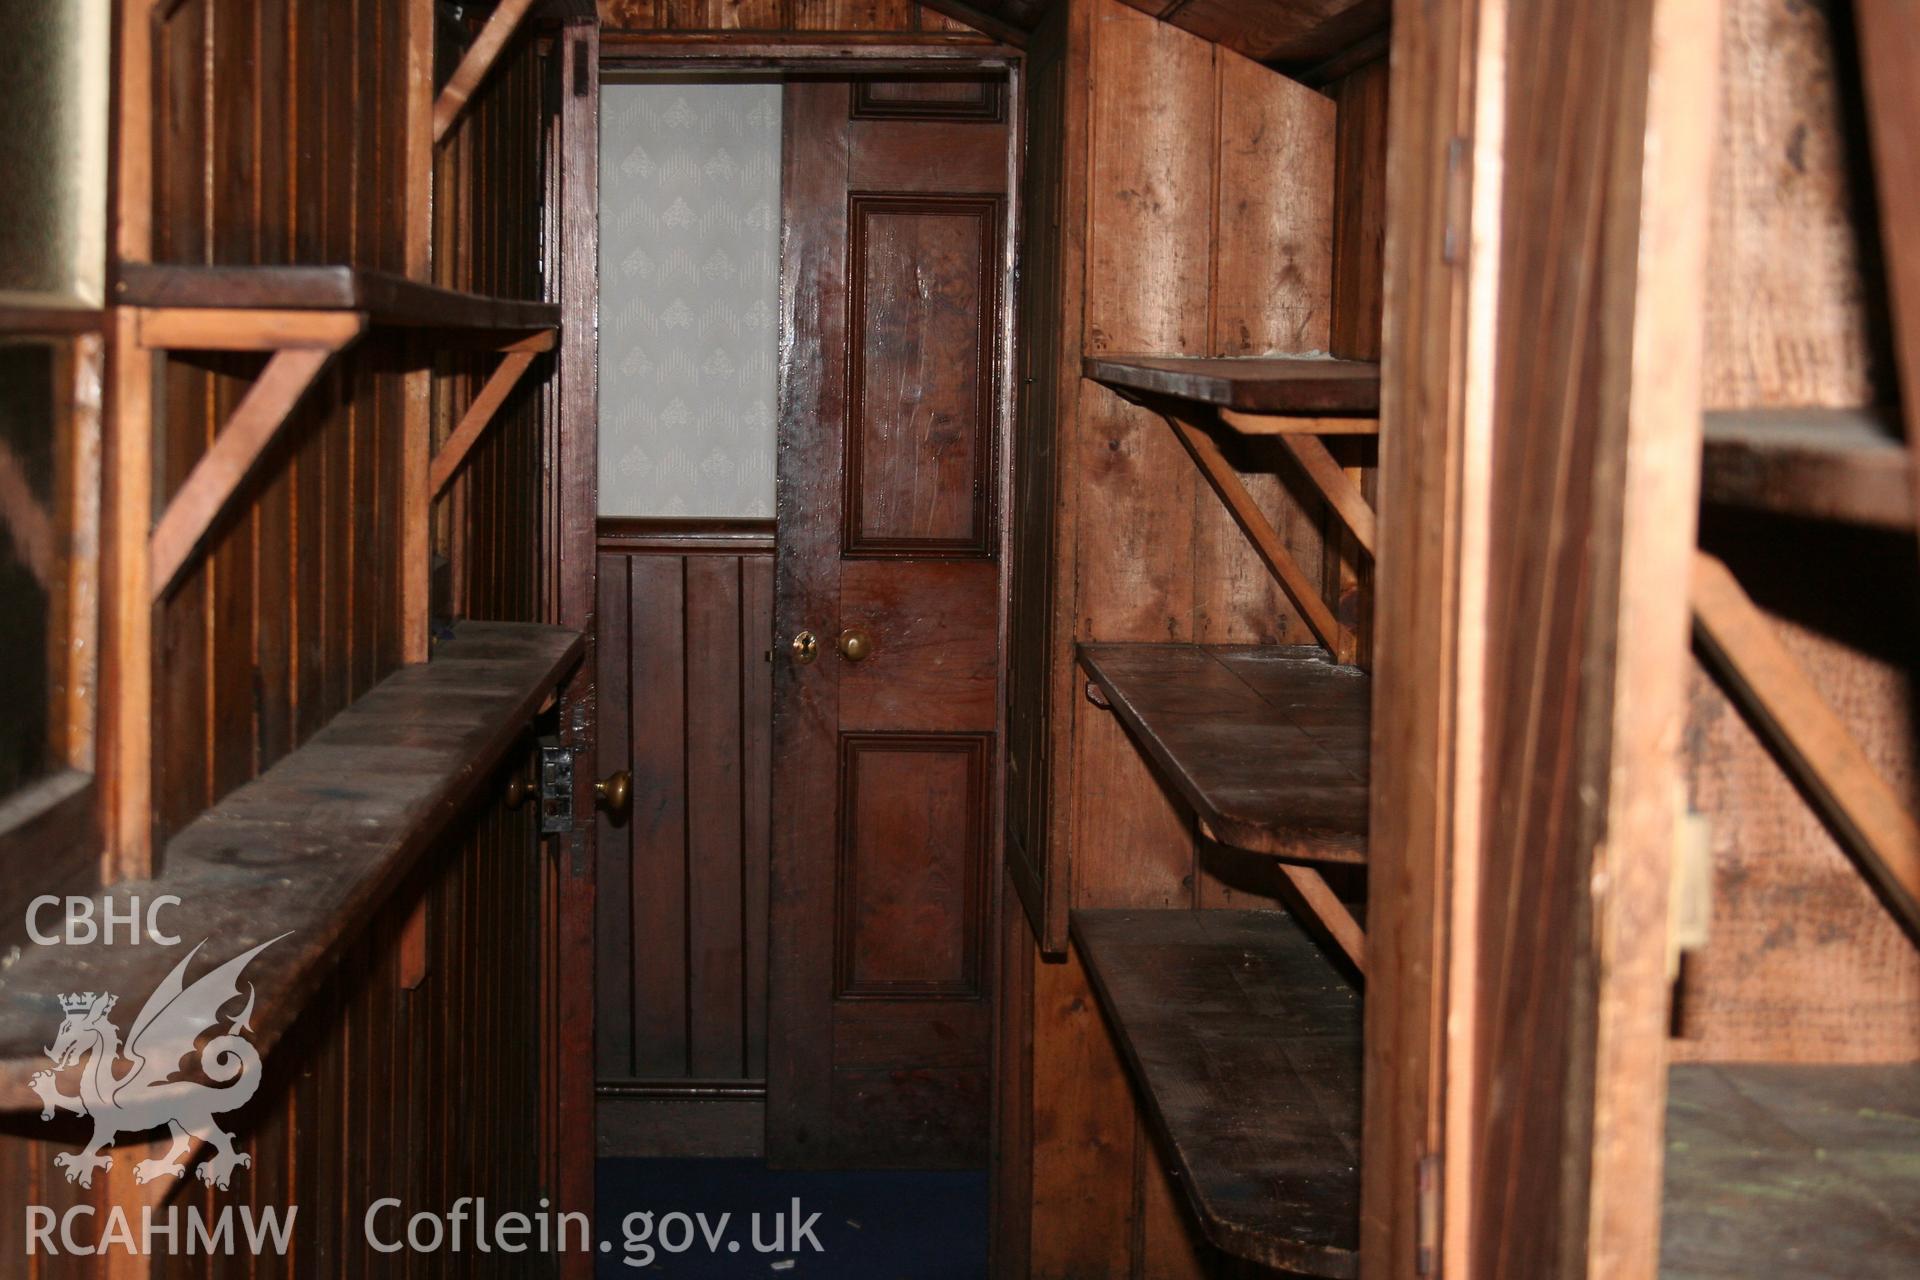 Hanbury Road baptist chapel, Bargoed, digital colour photograph showing wooden shelving, received in the course of Emergency Recording case ref no RCS2/1/2247.